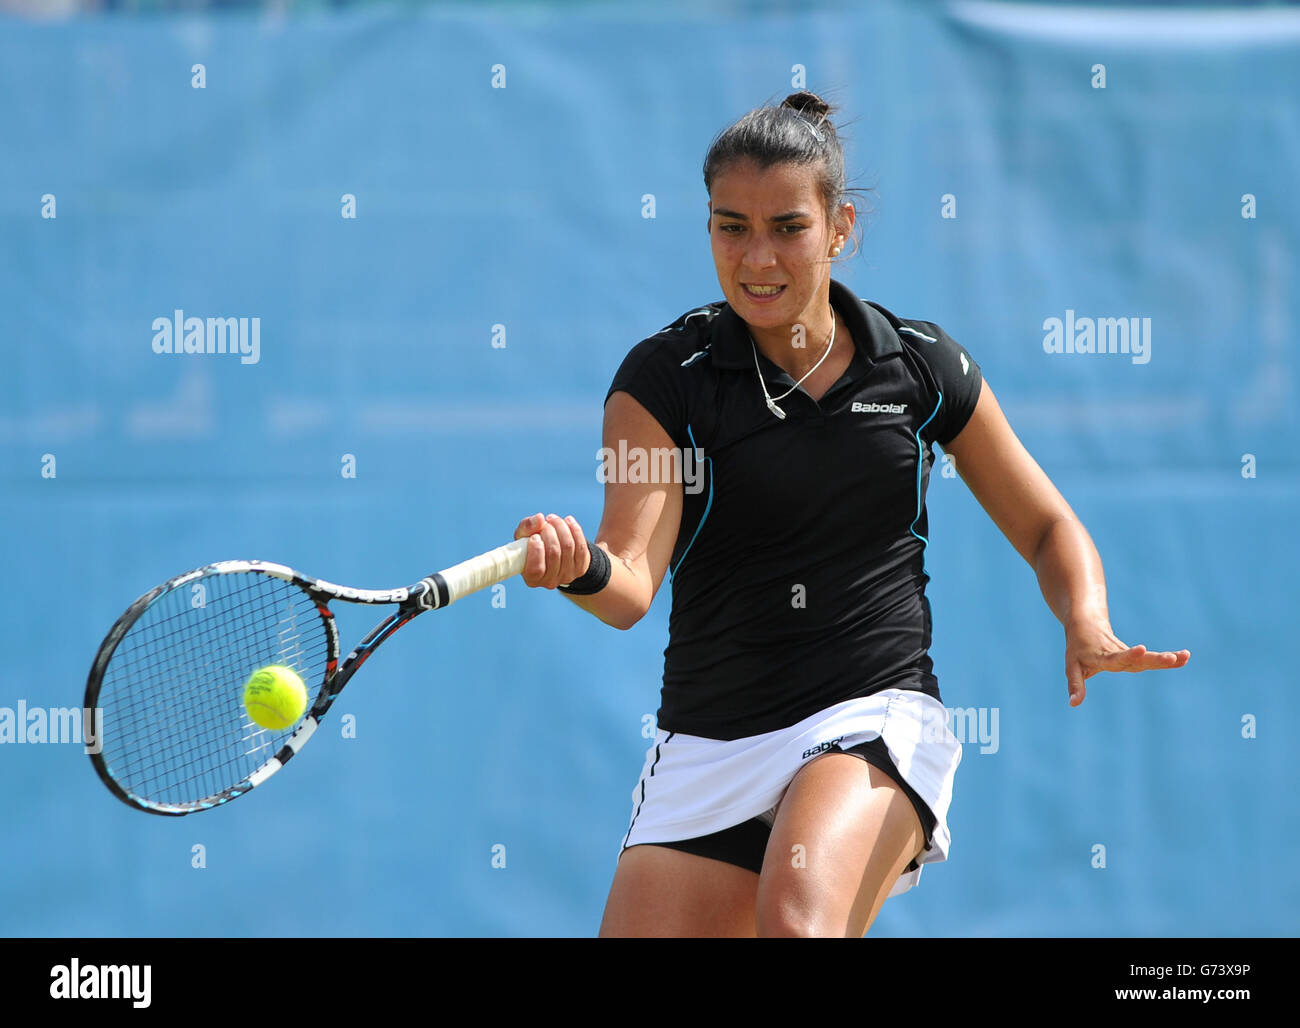 Paraguay's Veronica Cepede Royg in action against Great Britain's Katie Boulter during the AEGON Nottingham Challenge at The Nottingham Tennis Centre, Nottingham. Stock Photo